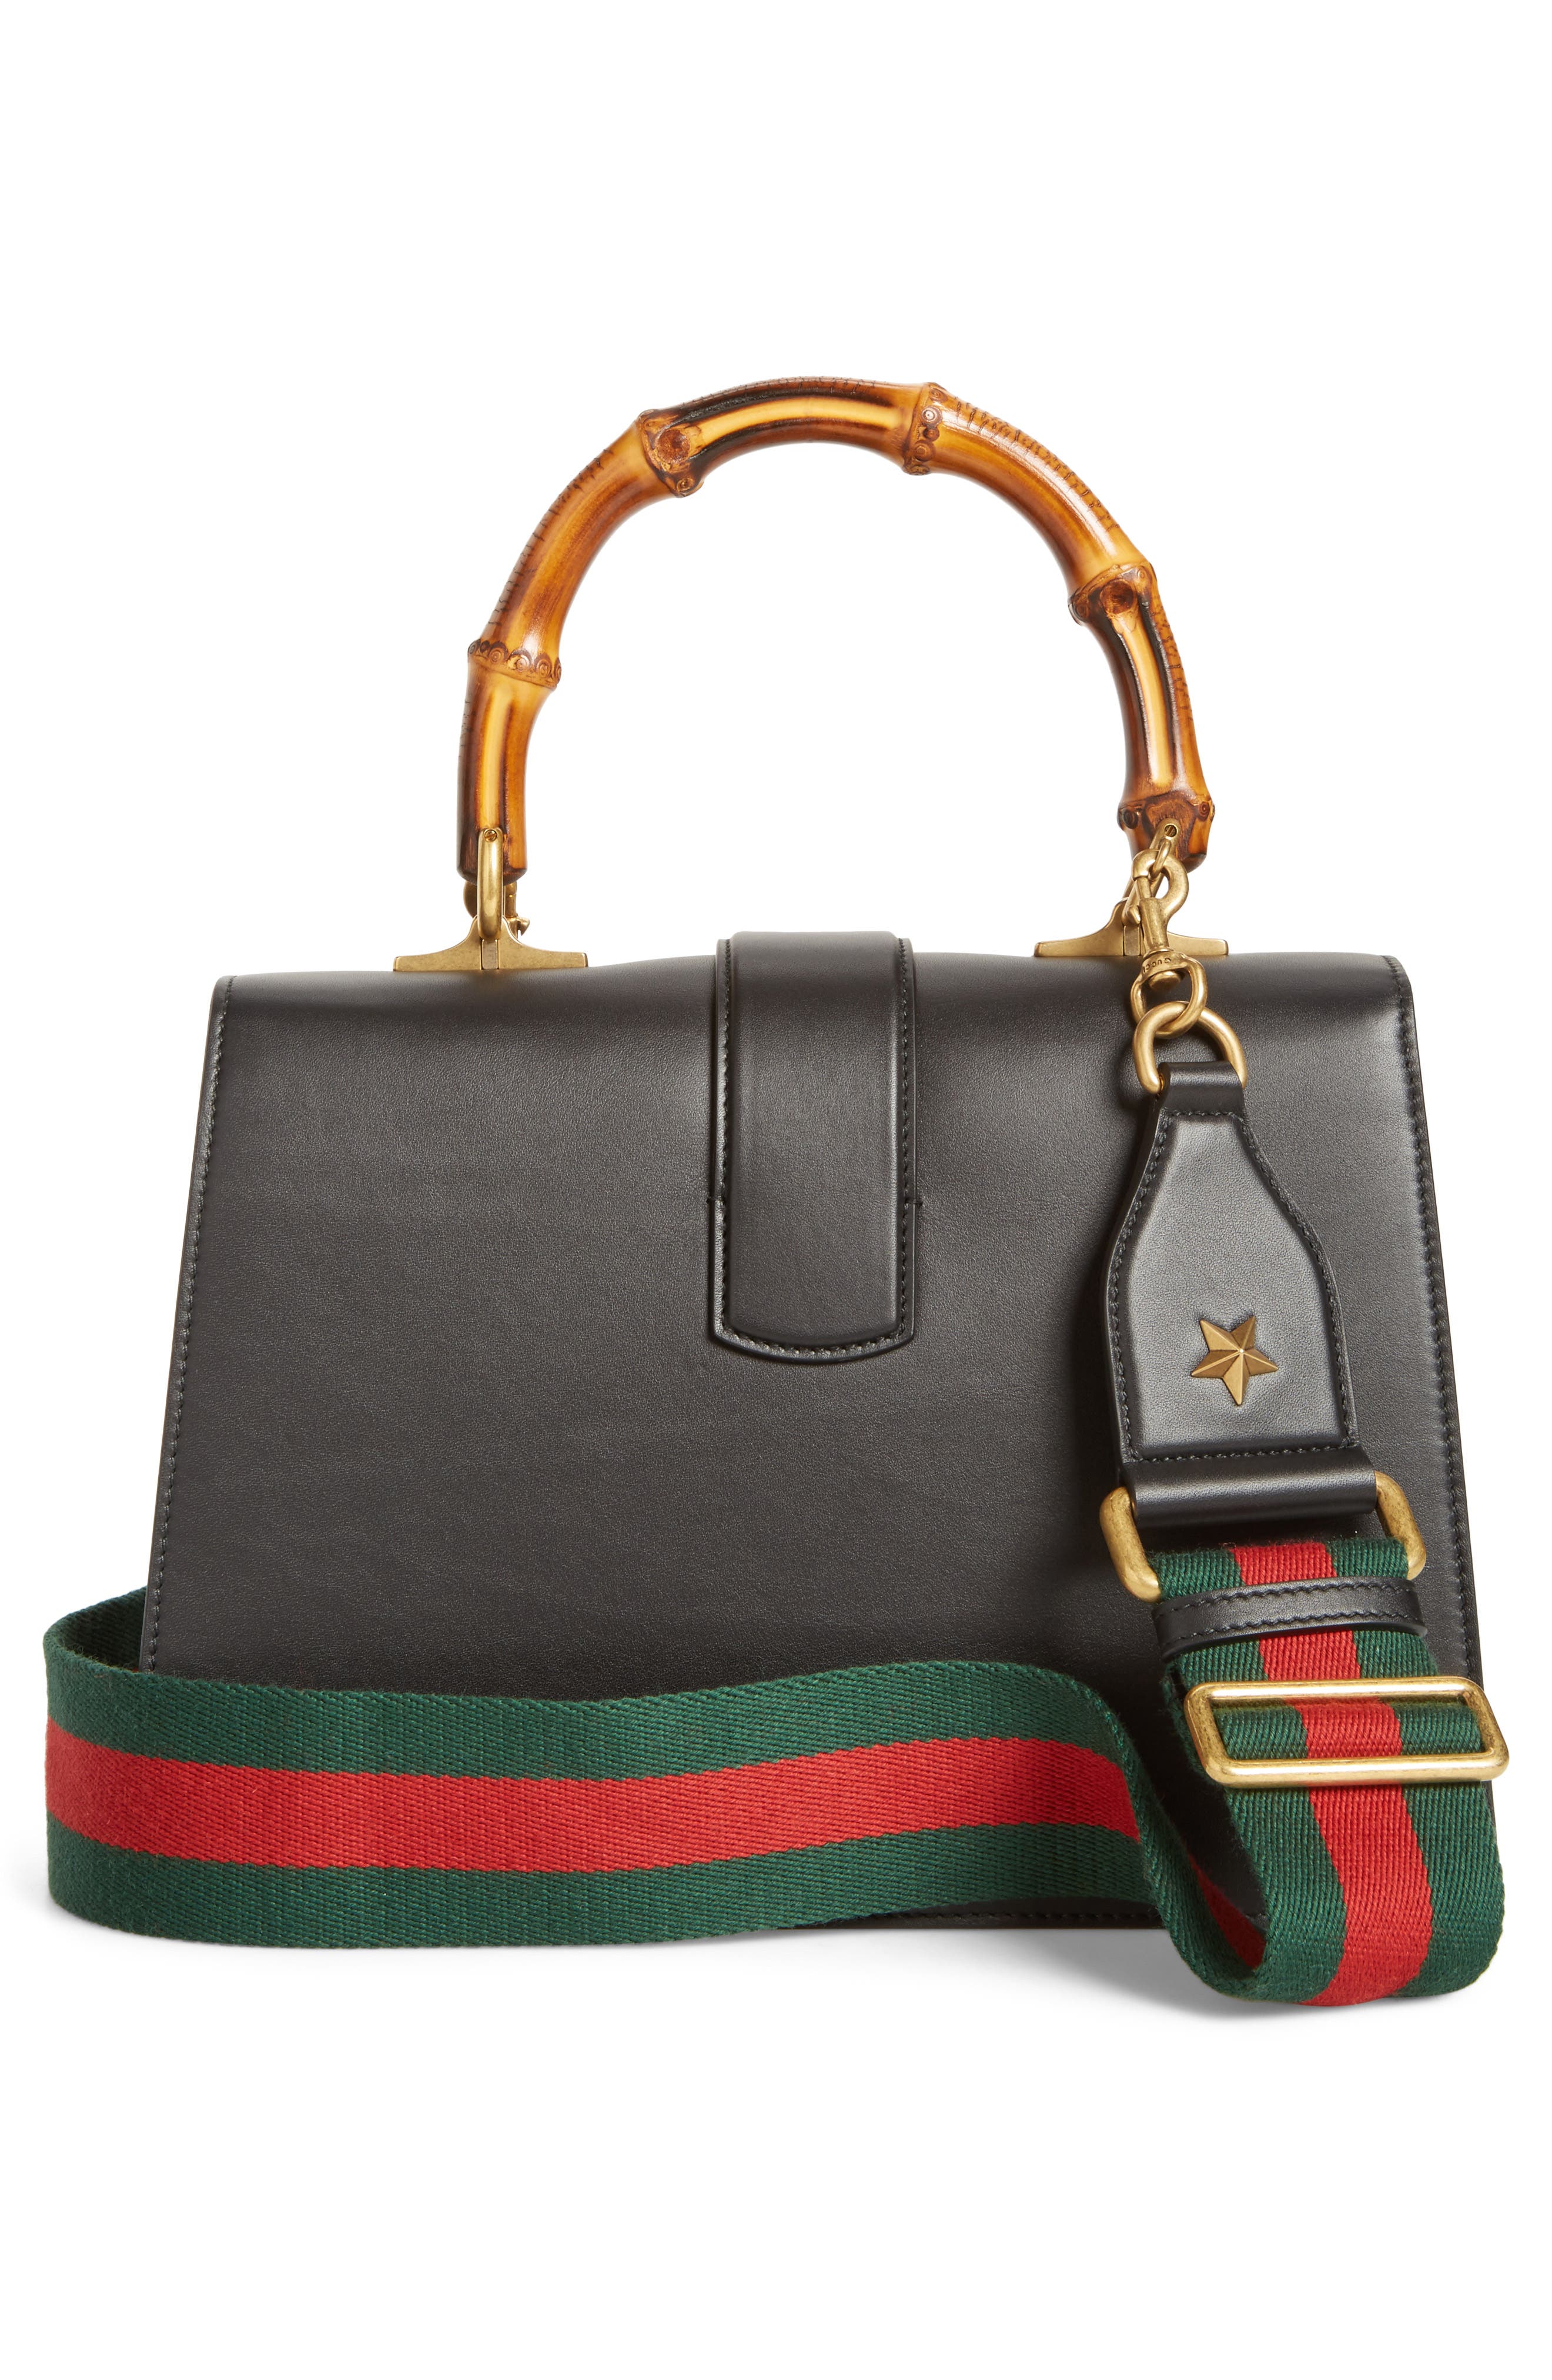 GUCCI Dionysus Stripped Leather Top Handle Bag, Black/Green/Red | ModeSens